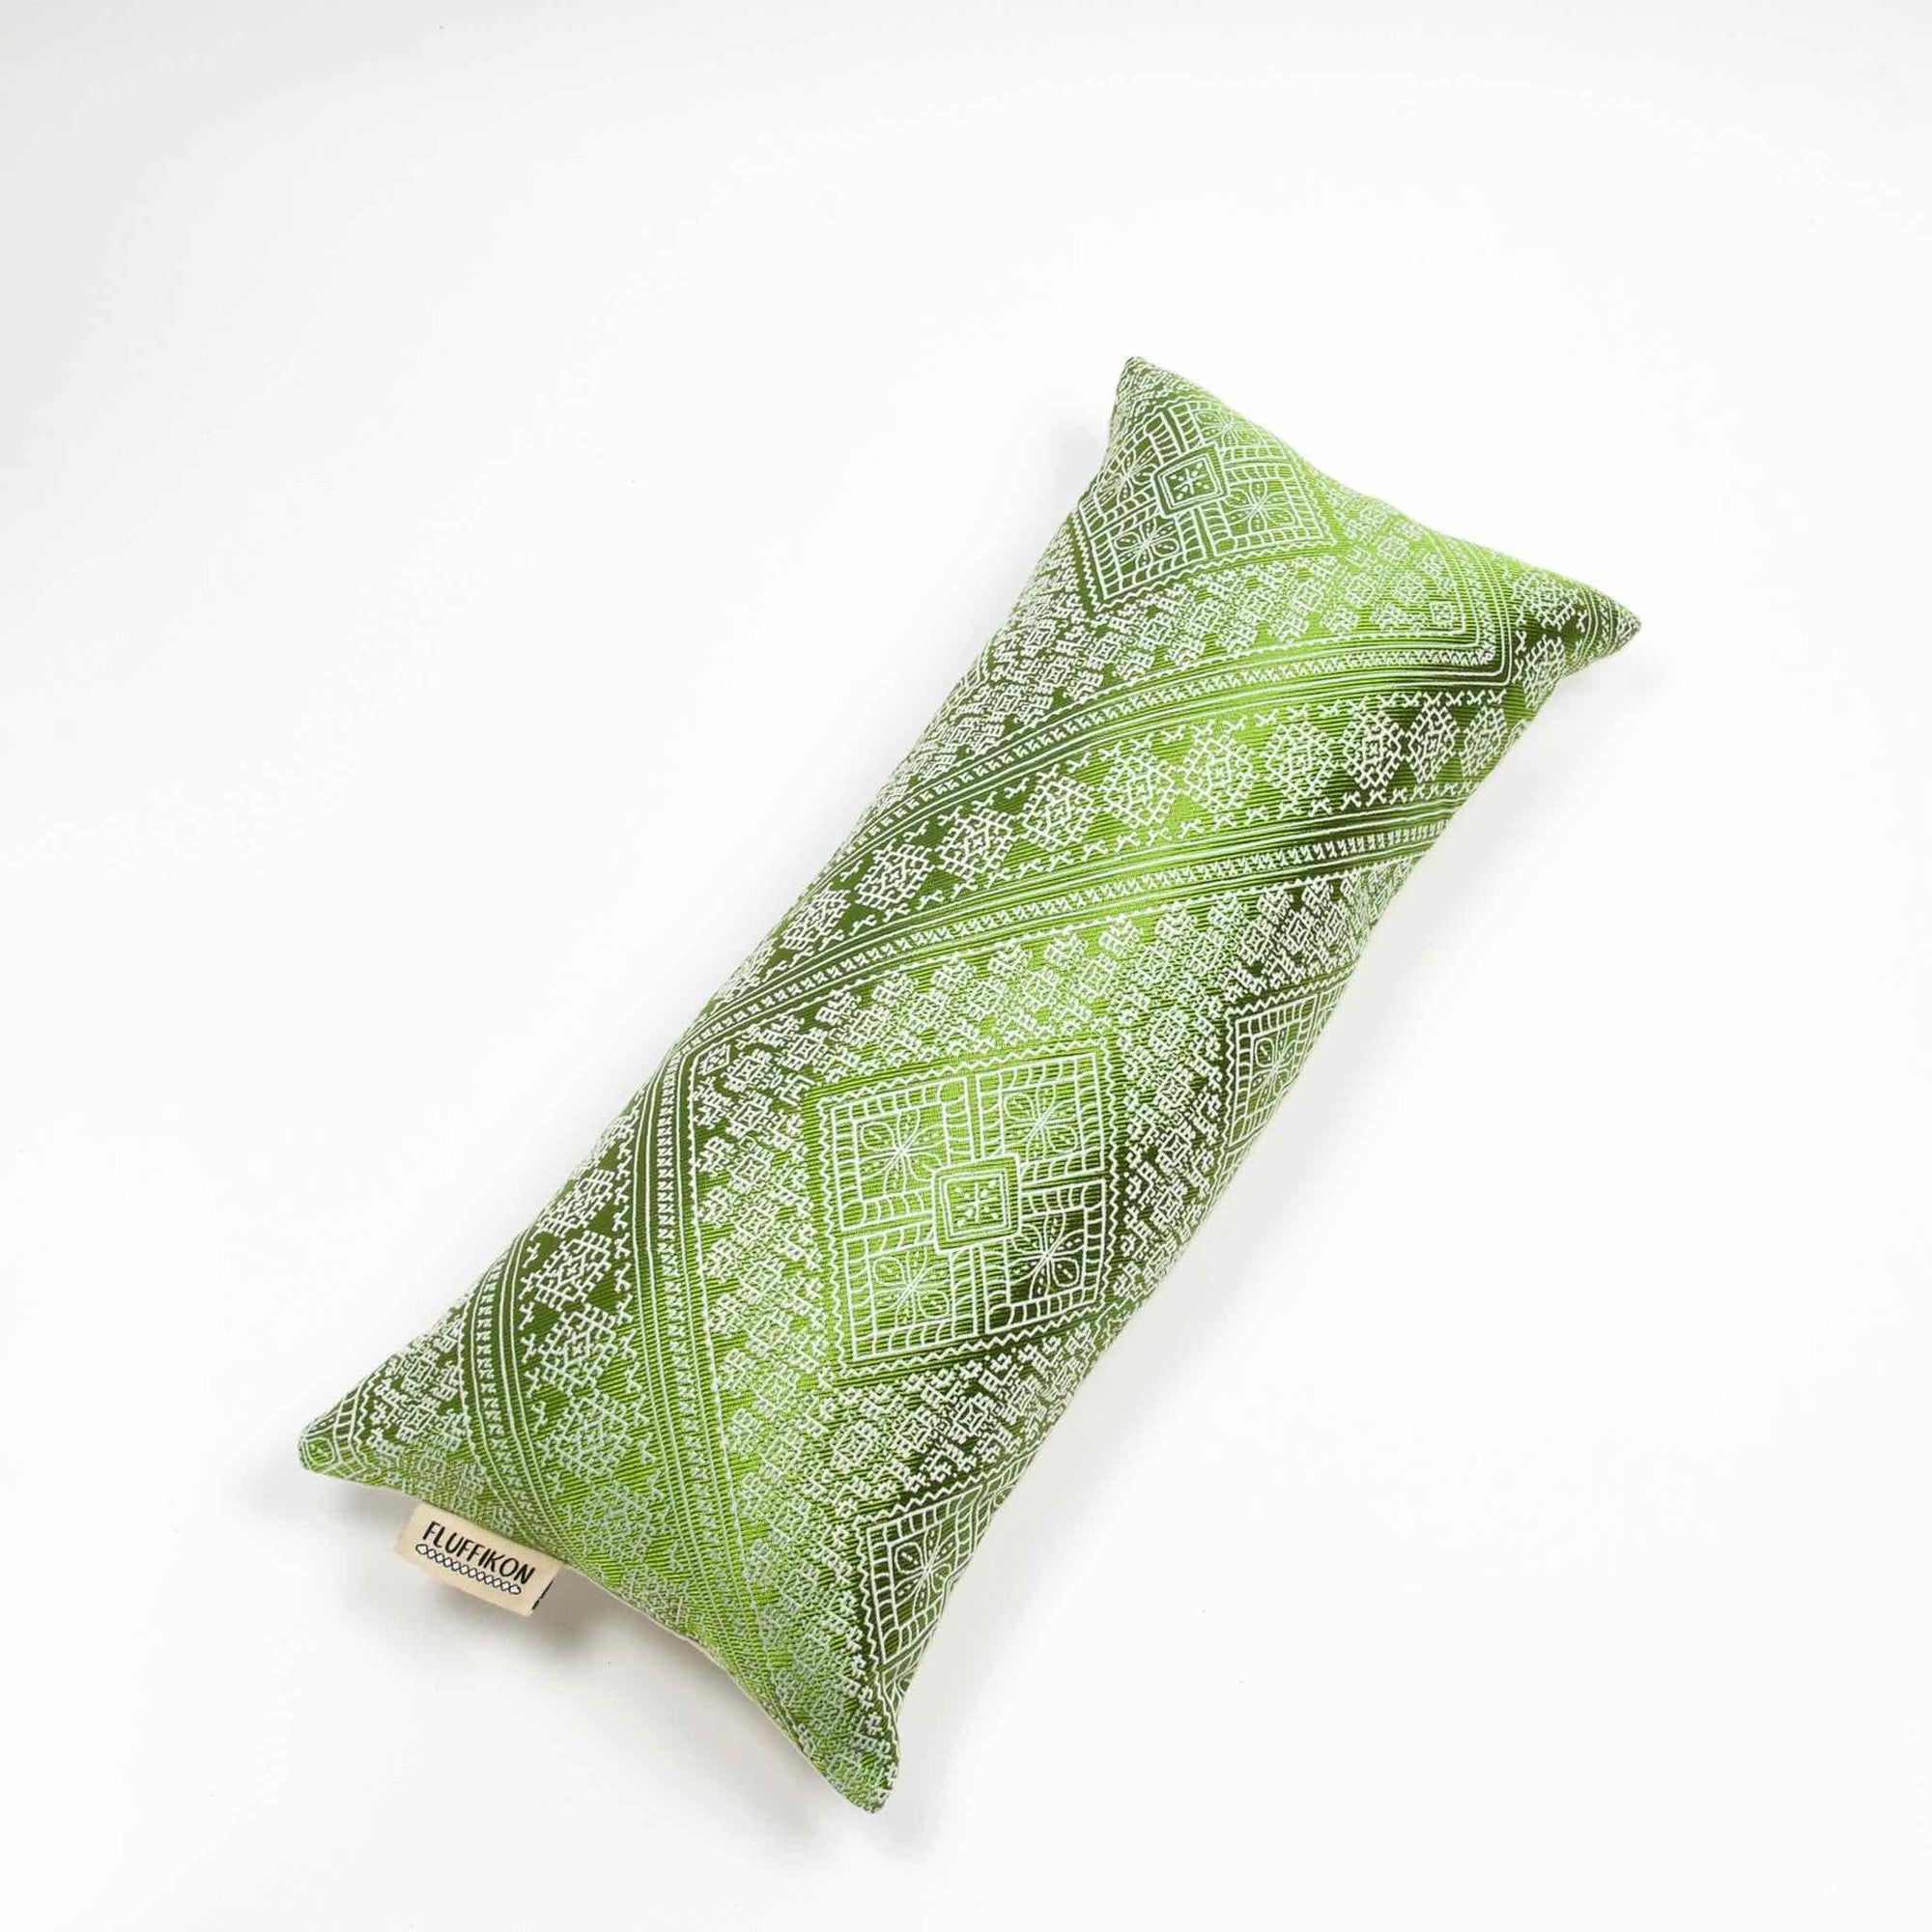 Fluffikon silk lumbar pillow made from green moroccan fabric. The throw pillow is shown from the back. Size: 35x70 cm